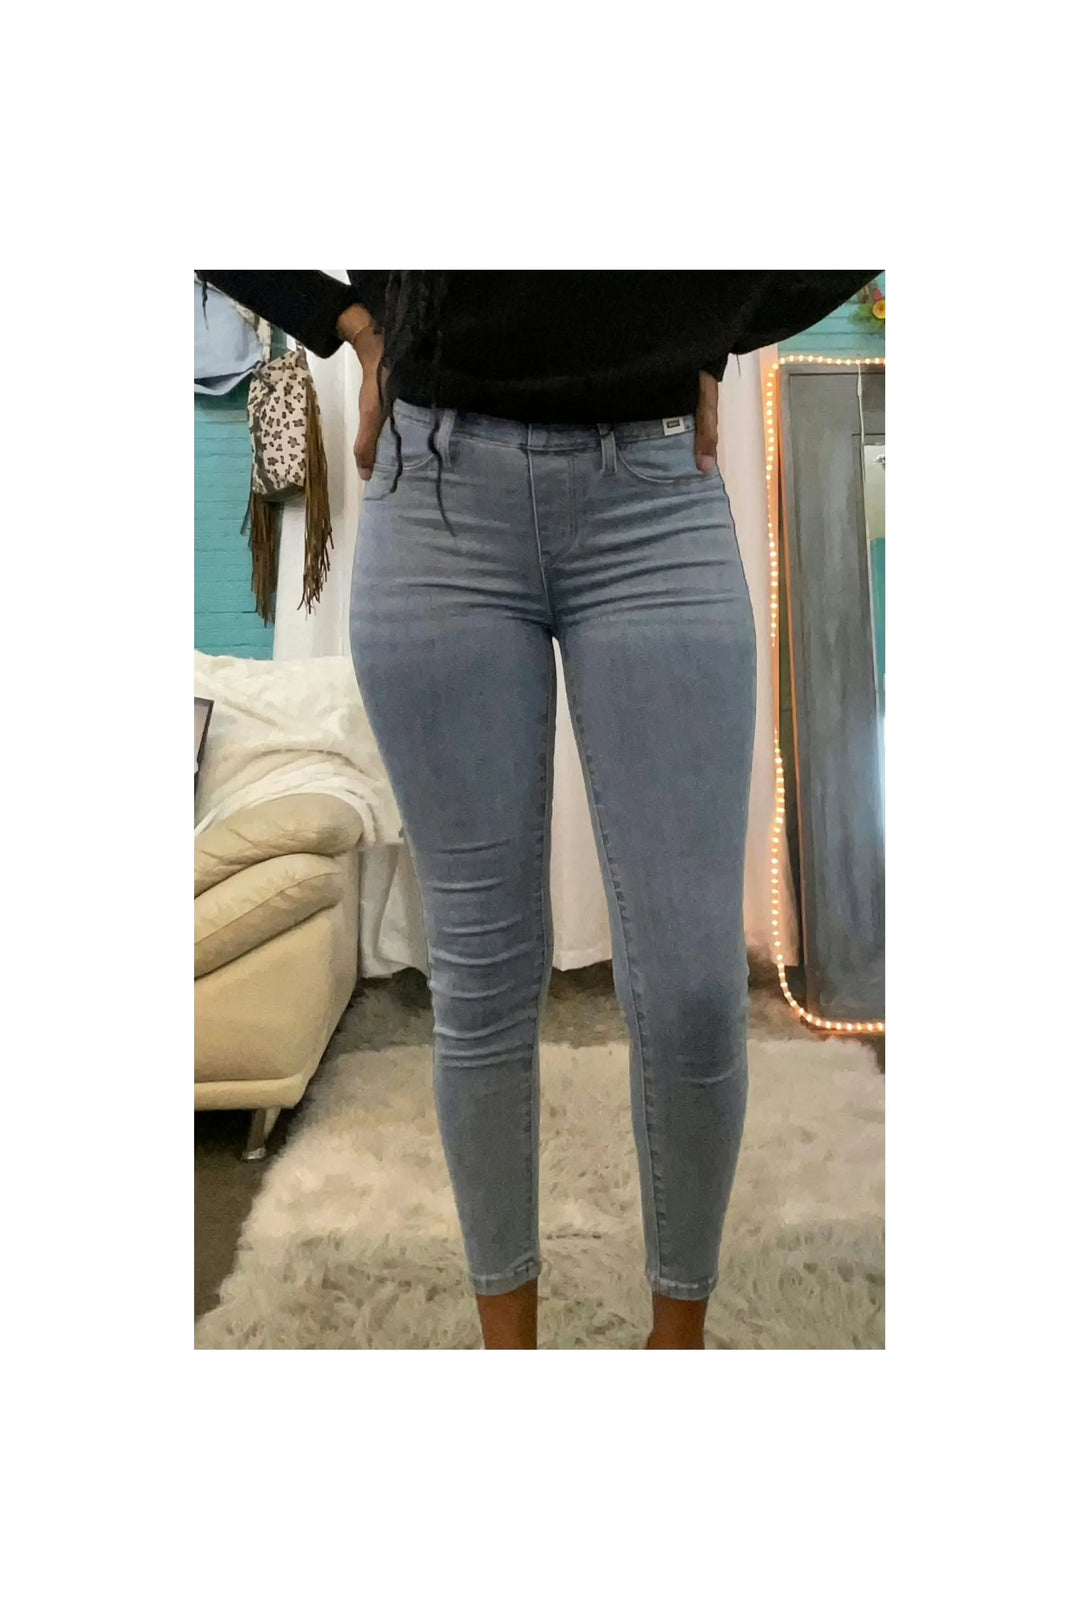 Judy Blue Mid-rise Skinny Jeggings-Bottoms-Judy Blue-Vintage Dragonfly-Women’s Fashion Boutique Located in Sumrall, Mississippi